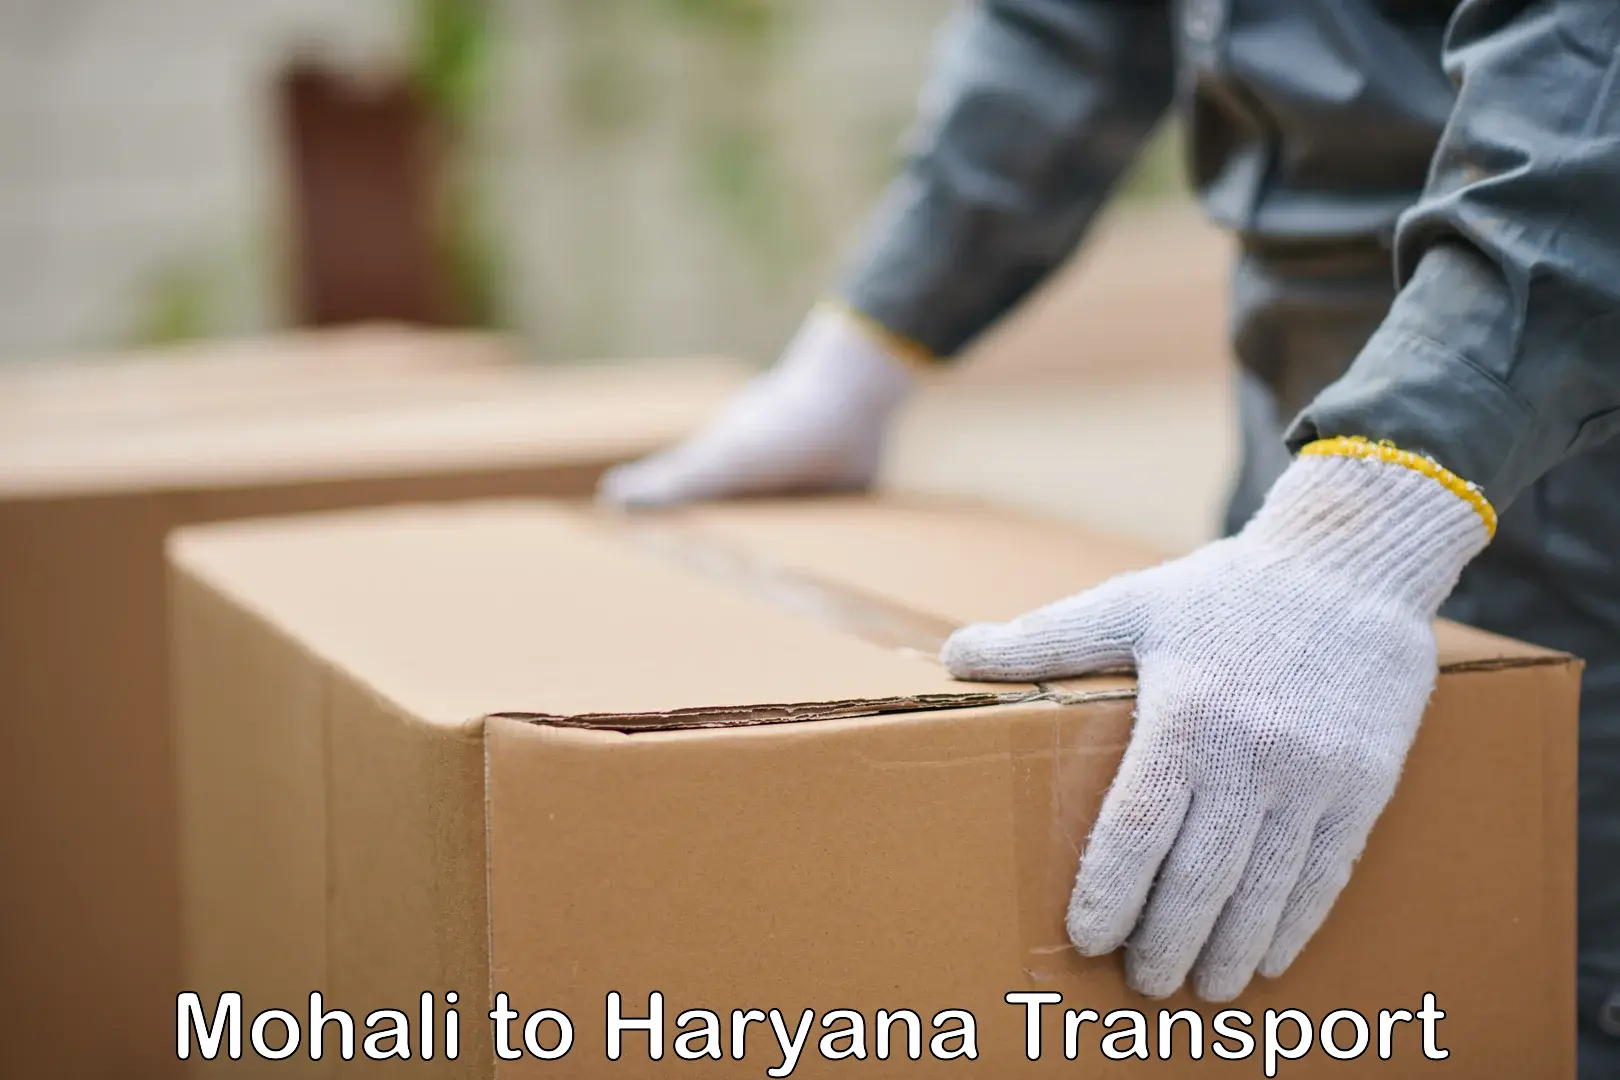 Delivery service Mohali to Jhajjar